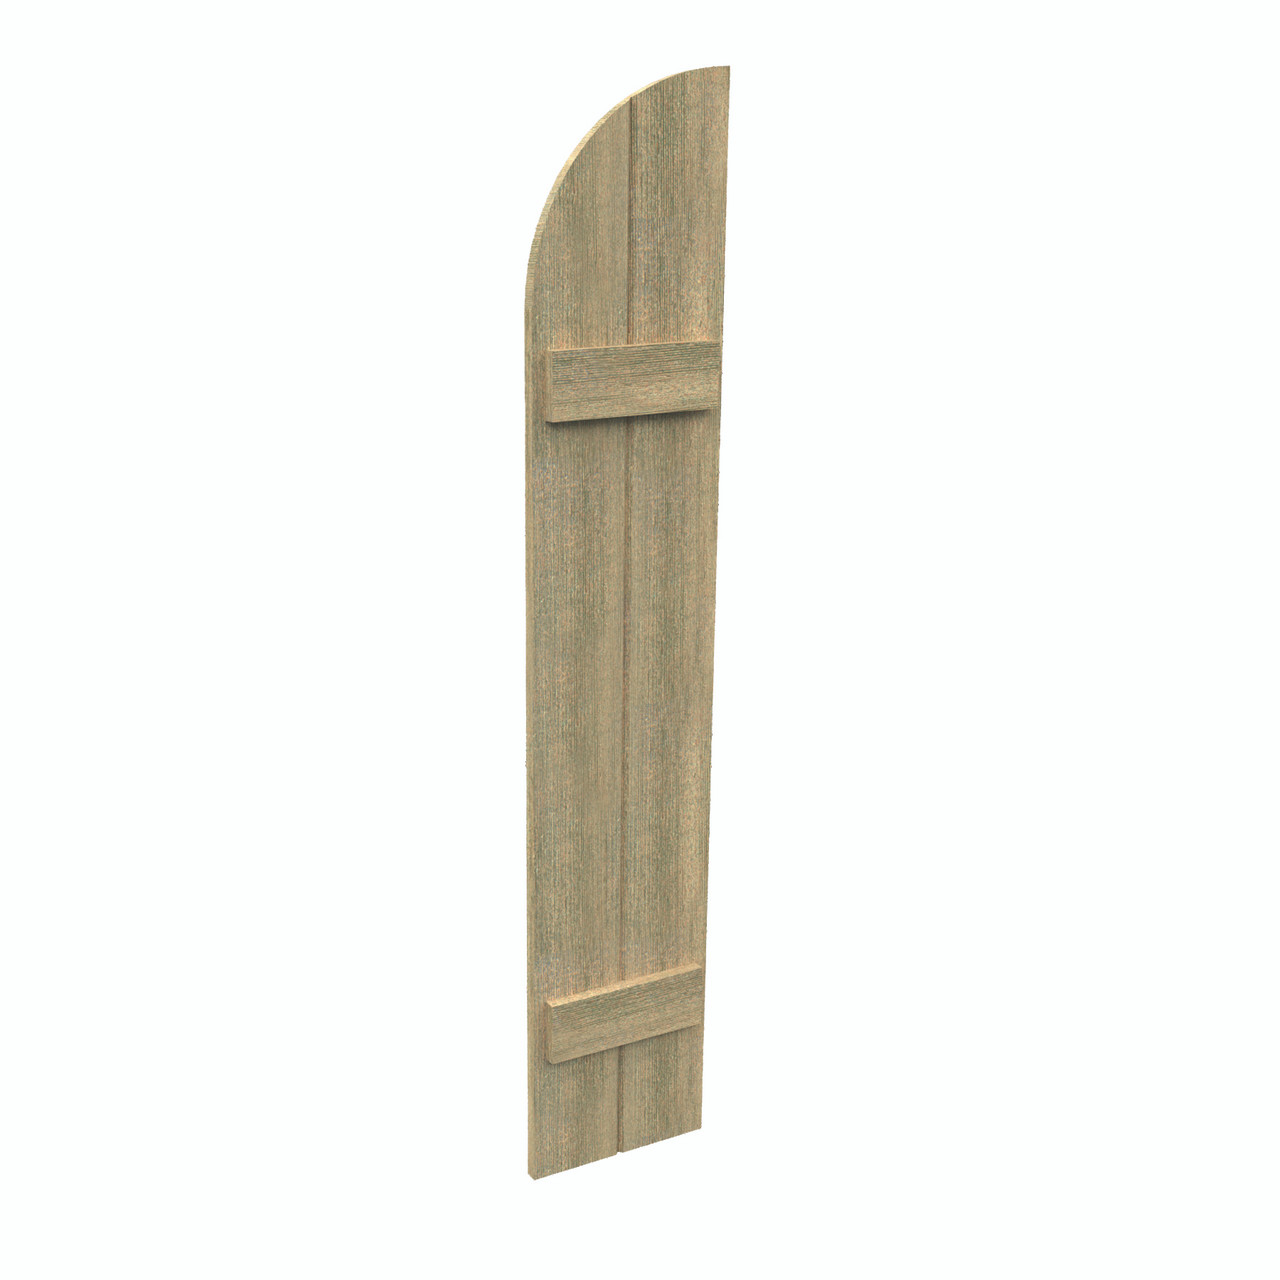 12 inch by 107 inch Quarter Round Shutter with 2-Boards